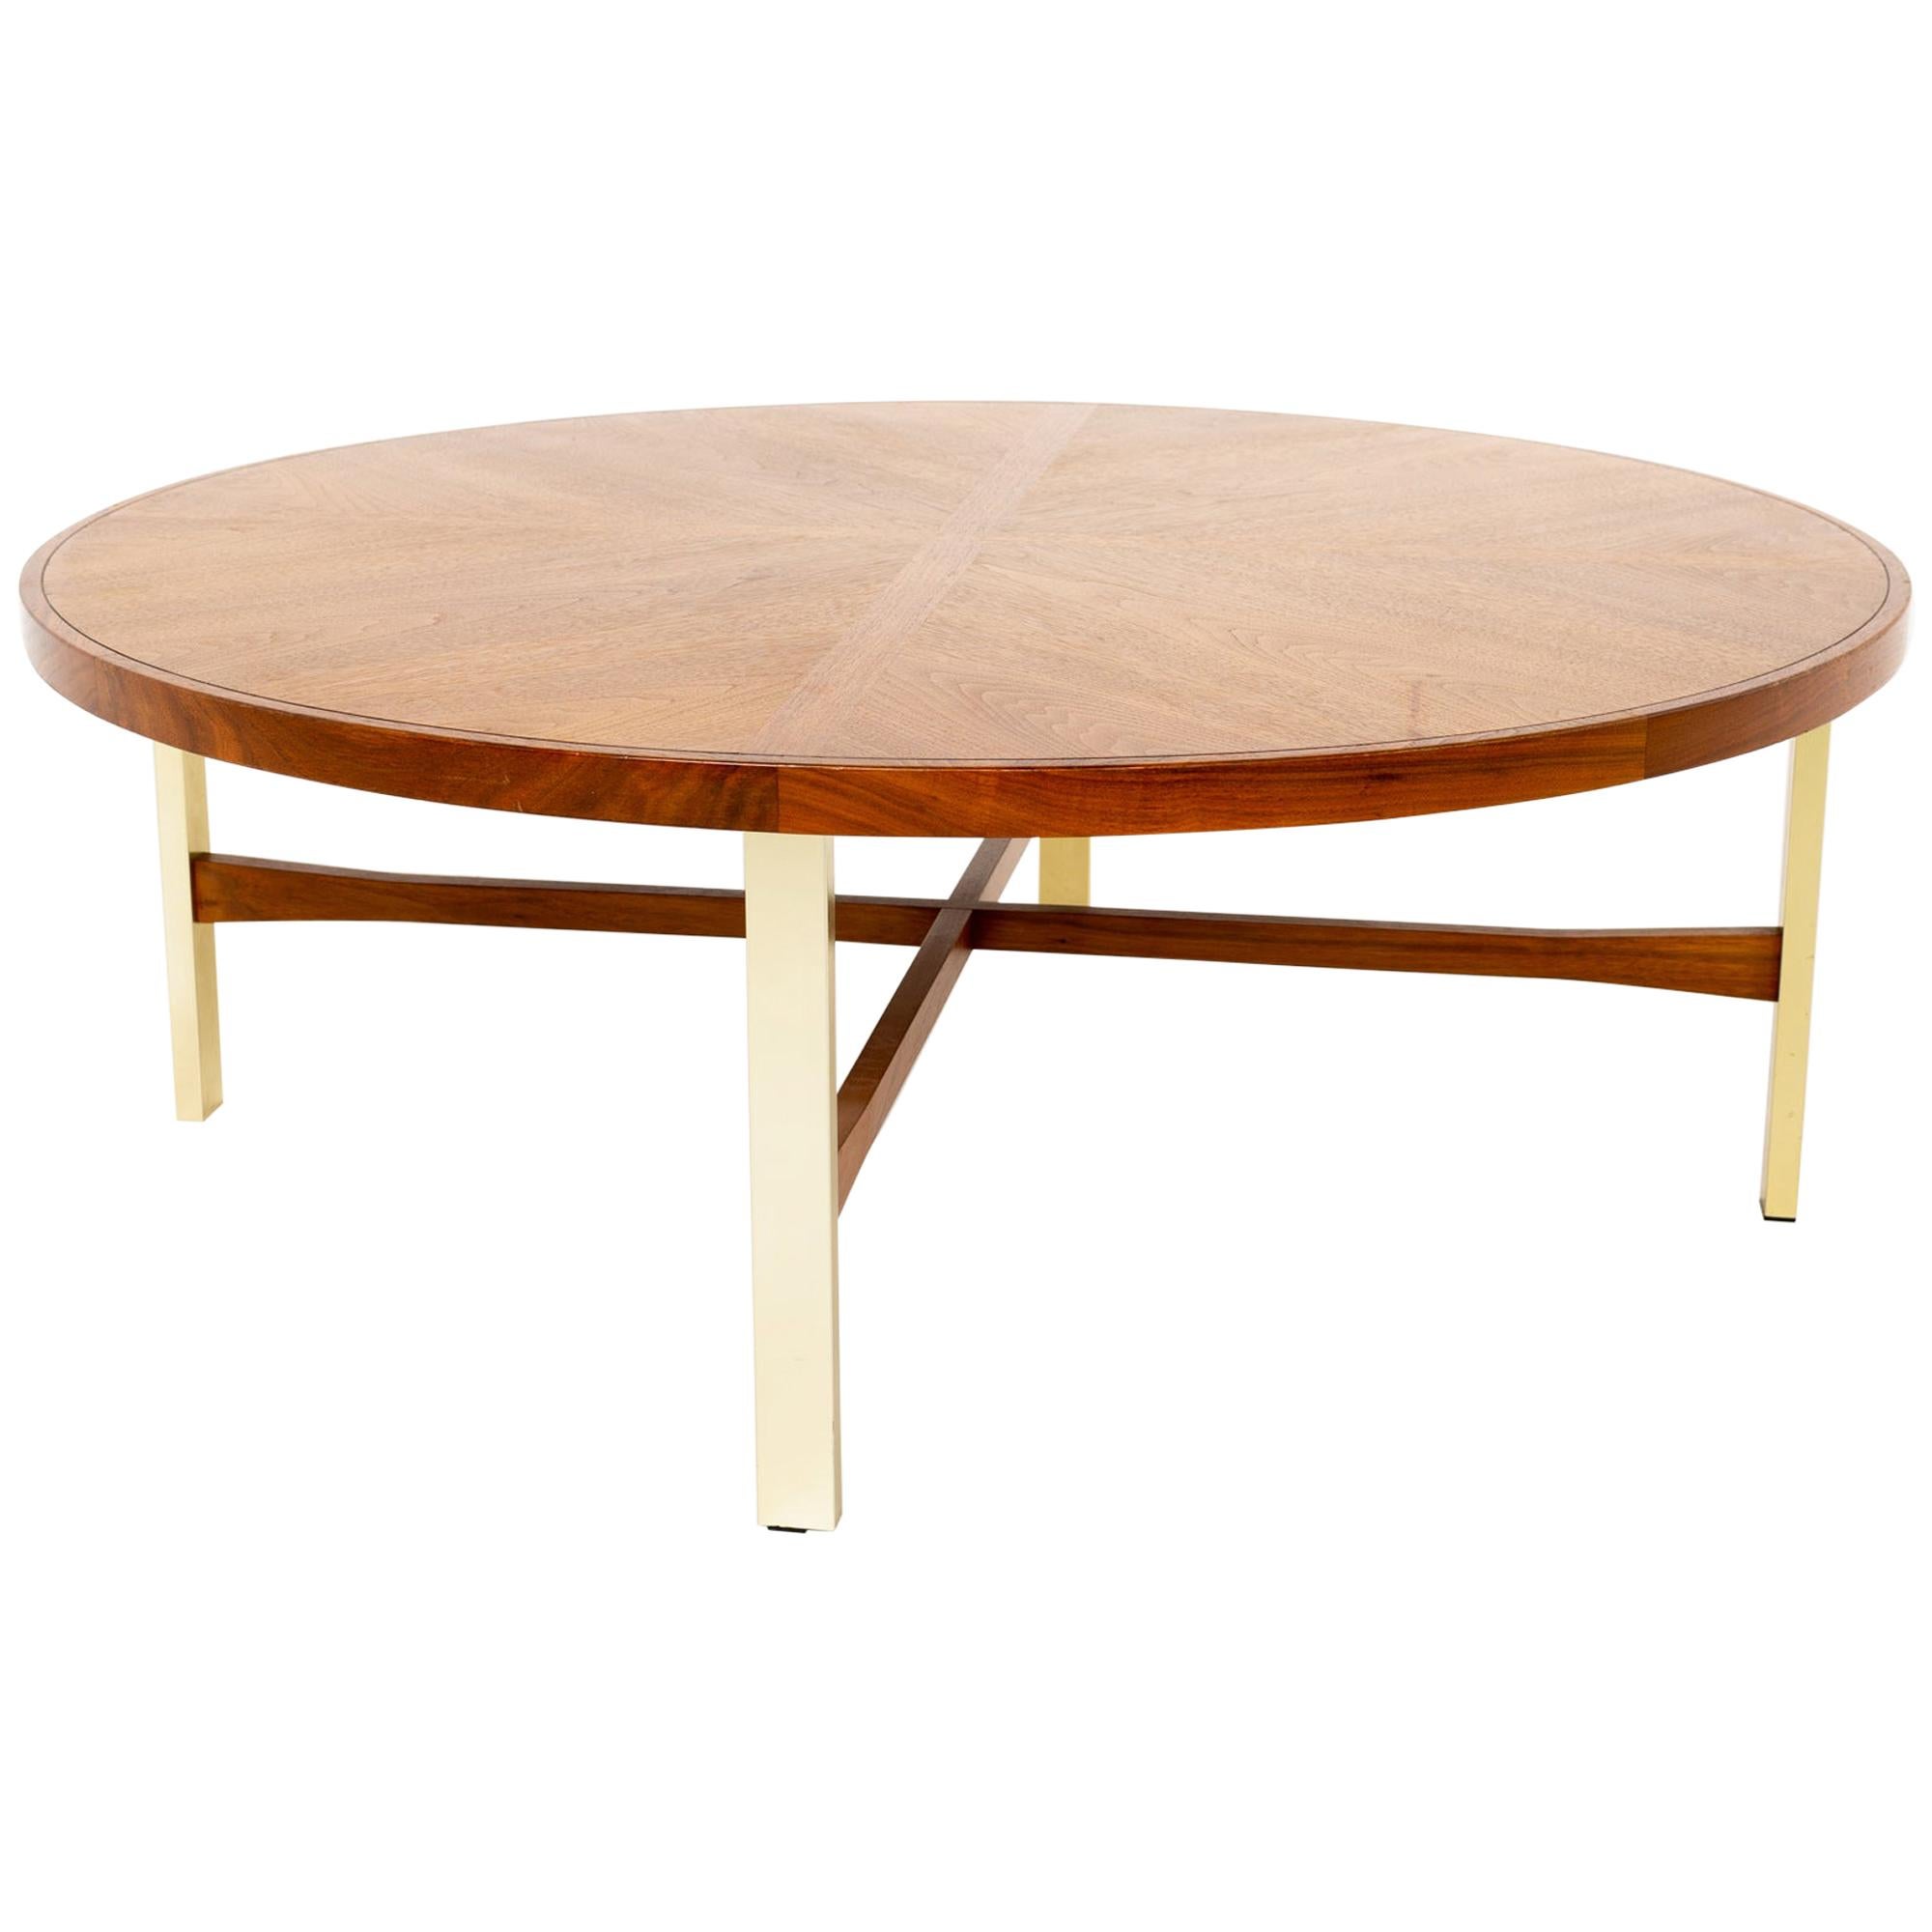 Drexel Heritage Mid Century Walnut and Brass Round Coffee Table